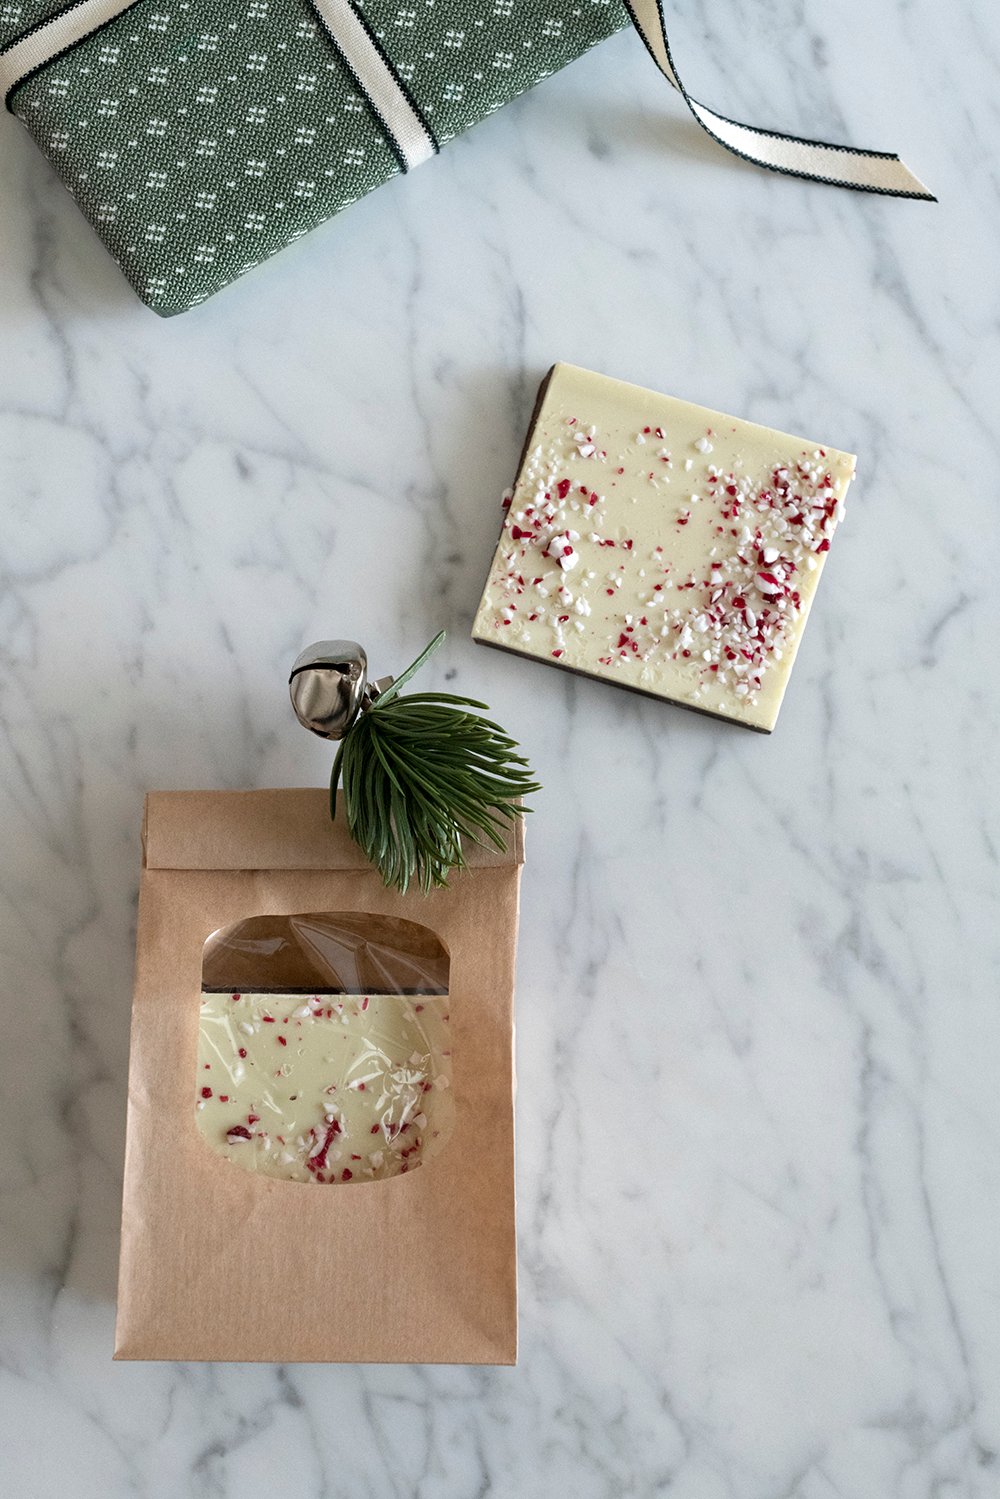 DIY Food Gifts & Packaging Ideas - roomfortuesday.com